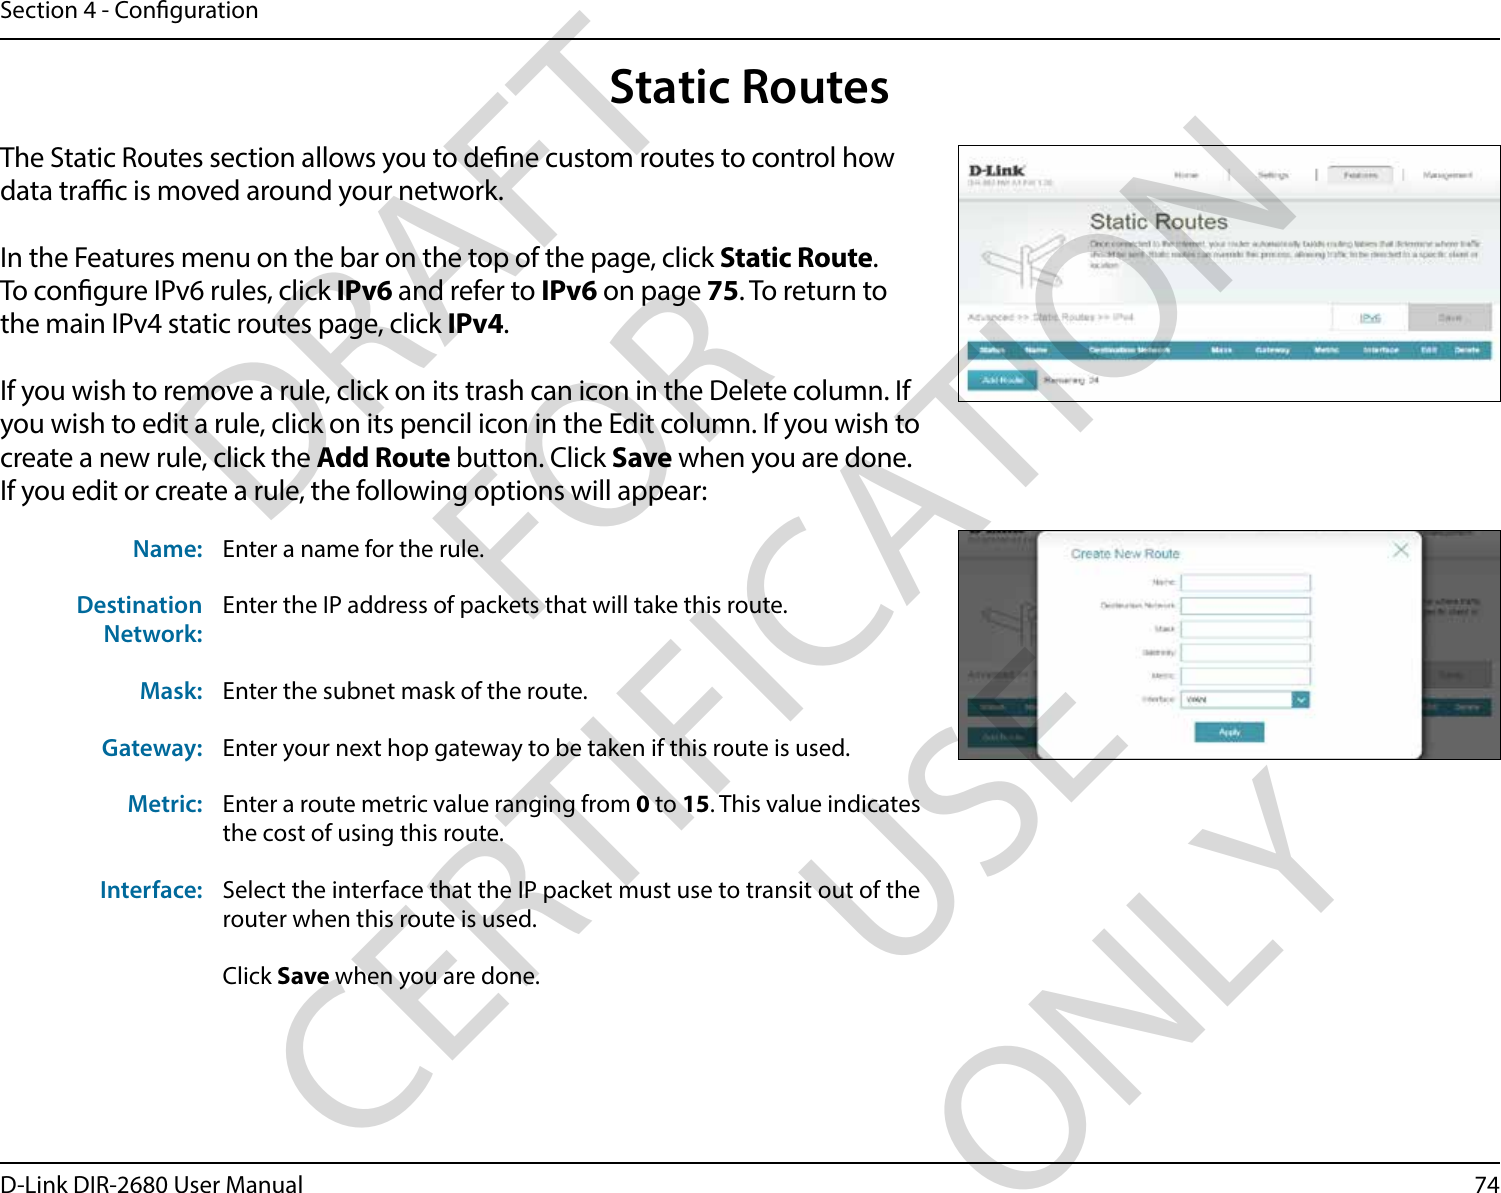 74D-Link DIR-2680 User ManualSection 4 - CongurationStatic RoutesThe Static Routes section allows you to dene custom routes to control how data trac is moved around your network.In the Features menu on the bar on the top of the page, click Static Route.To congure IPv6 rules, click IPv6 and refer to IPv6 on page 75. To return to the main IPv4 static routes page, click IPv4.If you wish to remove a rule, click on its trash can icon in the Delete column. If you wish to edit a rule, click on its pencil icon in the Edit column. If you wish to create a new rule, click the Add Route button. Click Save when you are done. If you edit or create a rule, the following options will appear:Name: Enter a name for the rule.Destination Network:Enter the IP address of packets that will take this route.Mask: Enter the subnet mask of the route.Gateway: Enter your next hop gateway to be taken if this route is used.Metric: Enter a route metric value ranging from 0 to 15. This value indicates the cost of using this route. Interface: Select the interface that the IP packet must use to transit out of the router when this route is used. Click Save when you are done.DRAFT FOR CERTIFICATION USE ONLY